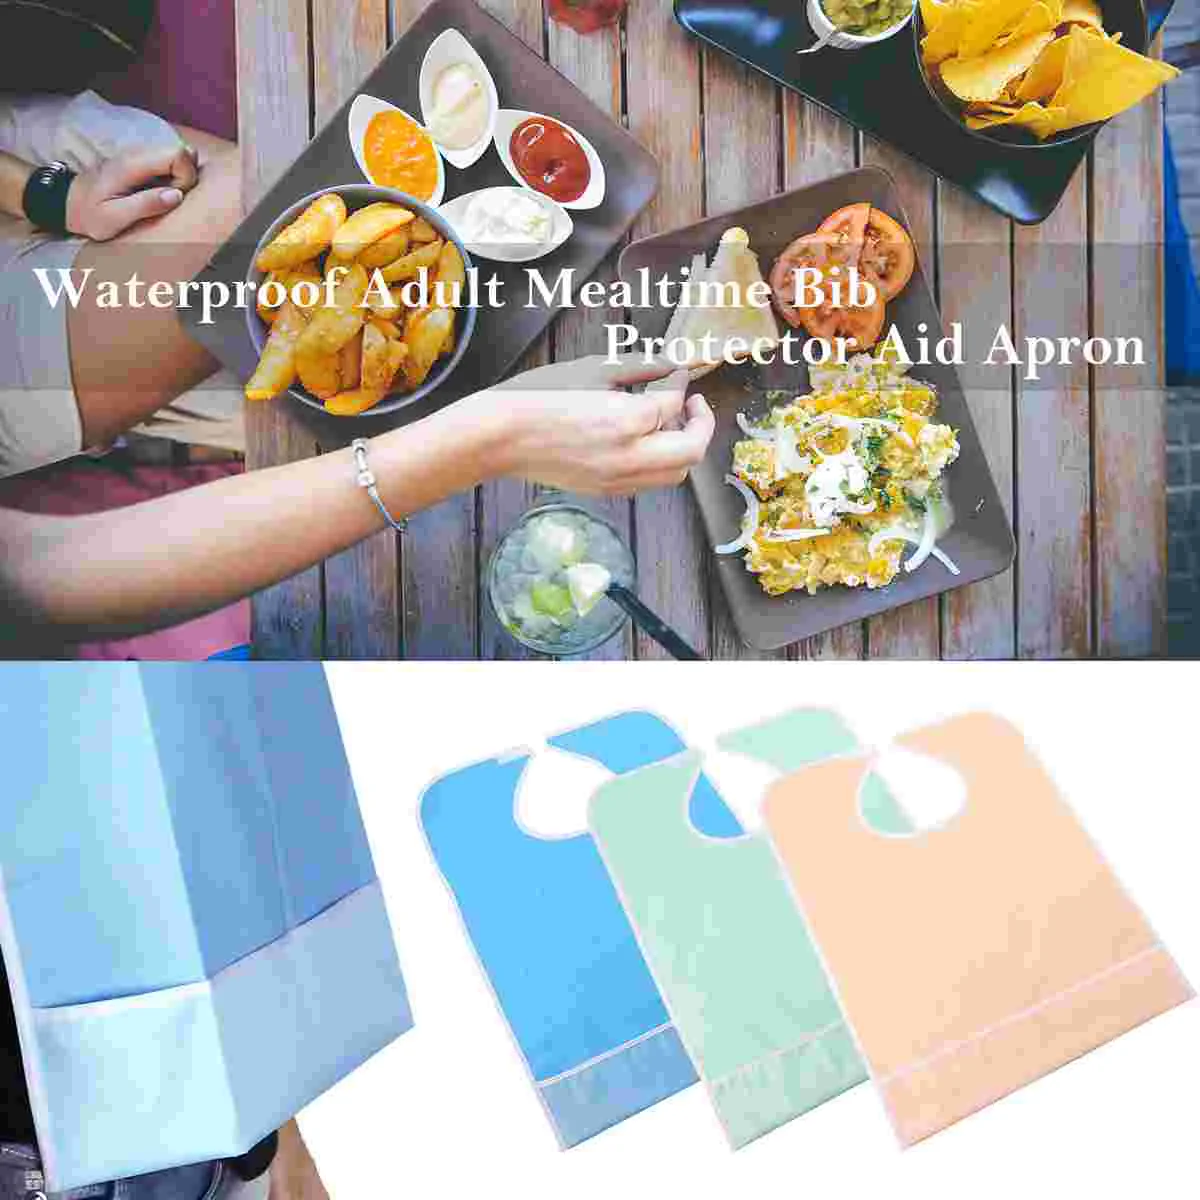 

Bib Adult Mealtime Bibs Protector Waterproof Apron Eating Clothing Aid Set Adults Cloth Feeding The Elderly Patient Absorbent